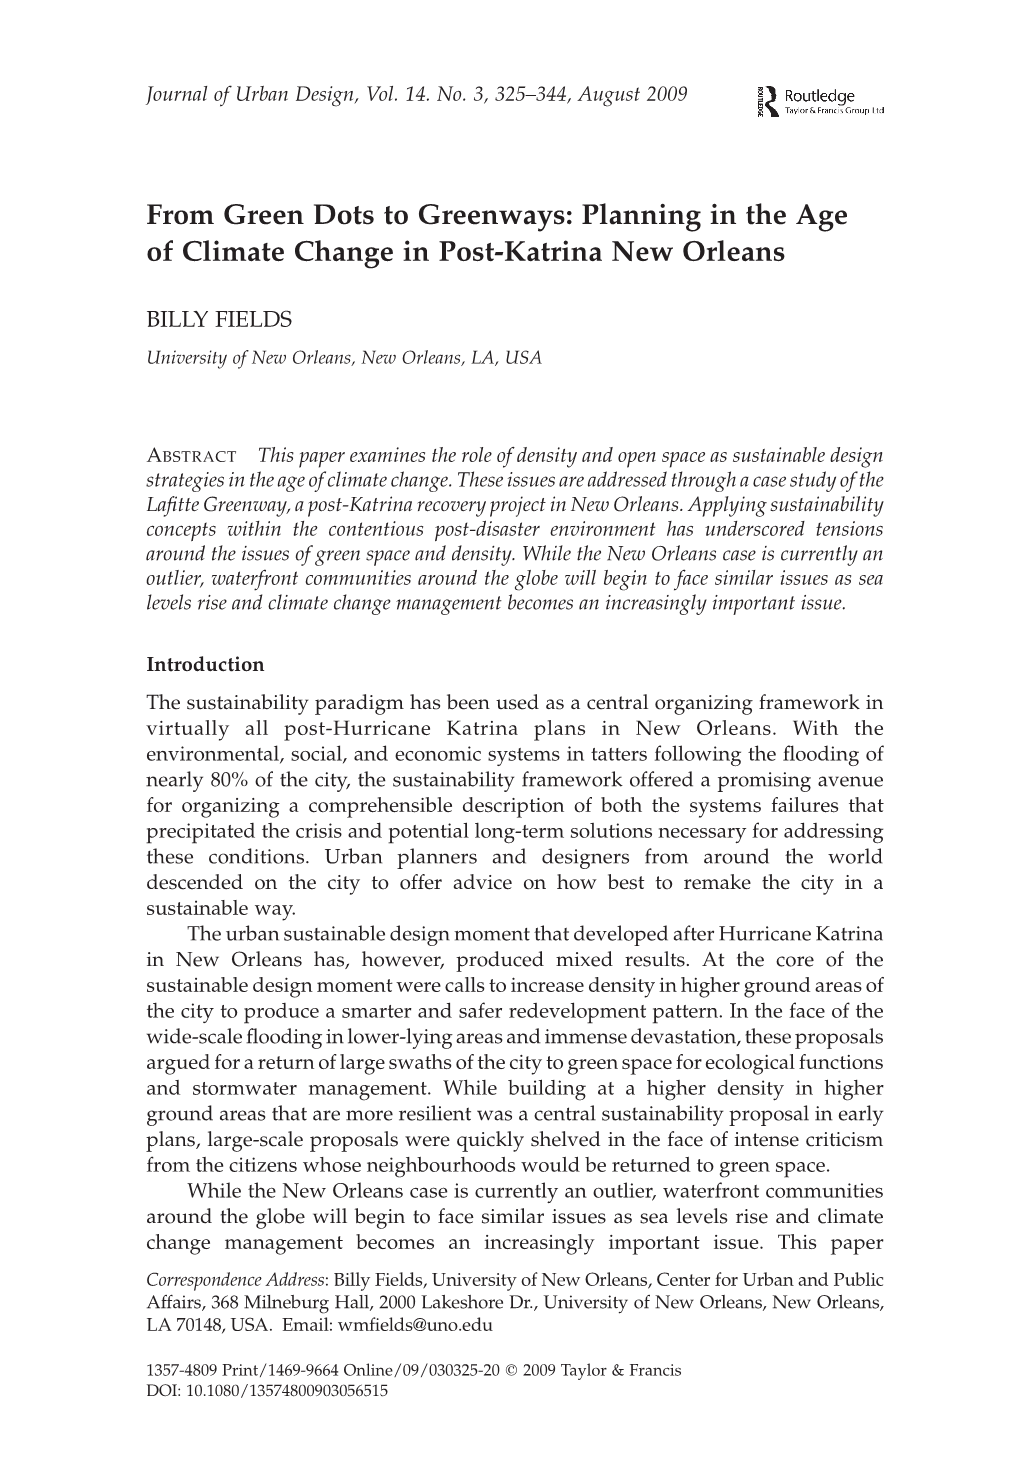 Planning in the Age of Climate Change in Post-Katrina New Orleans